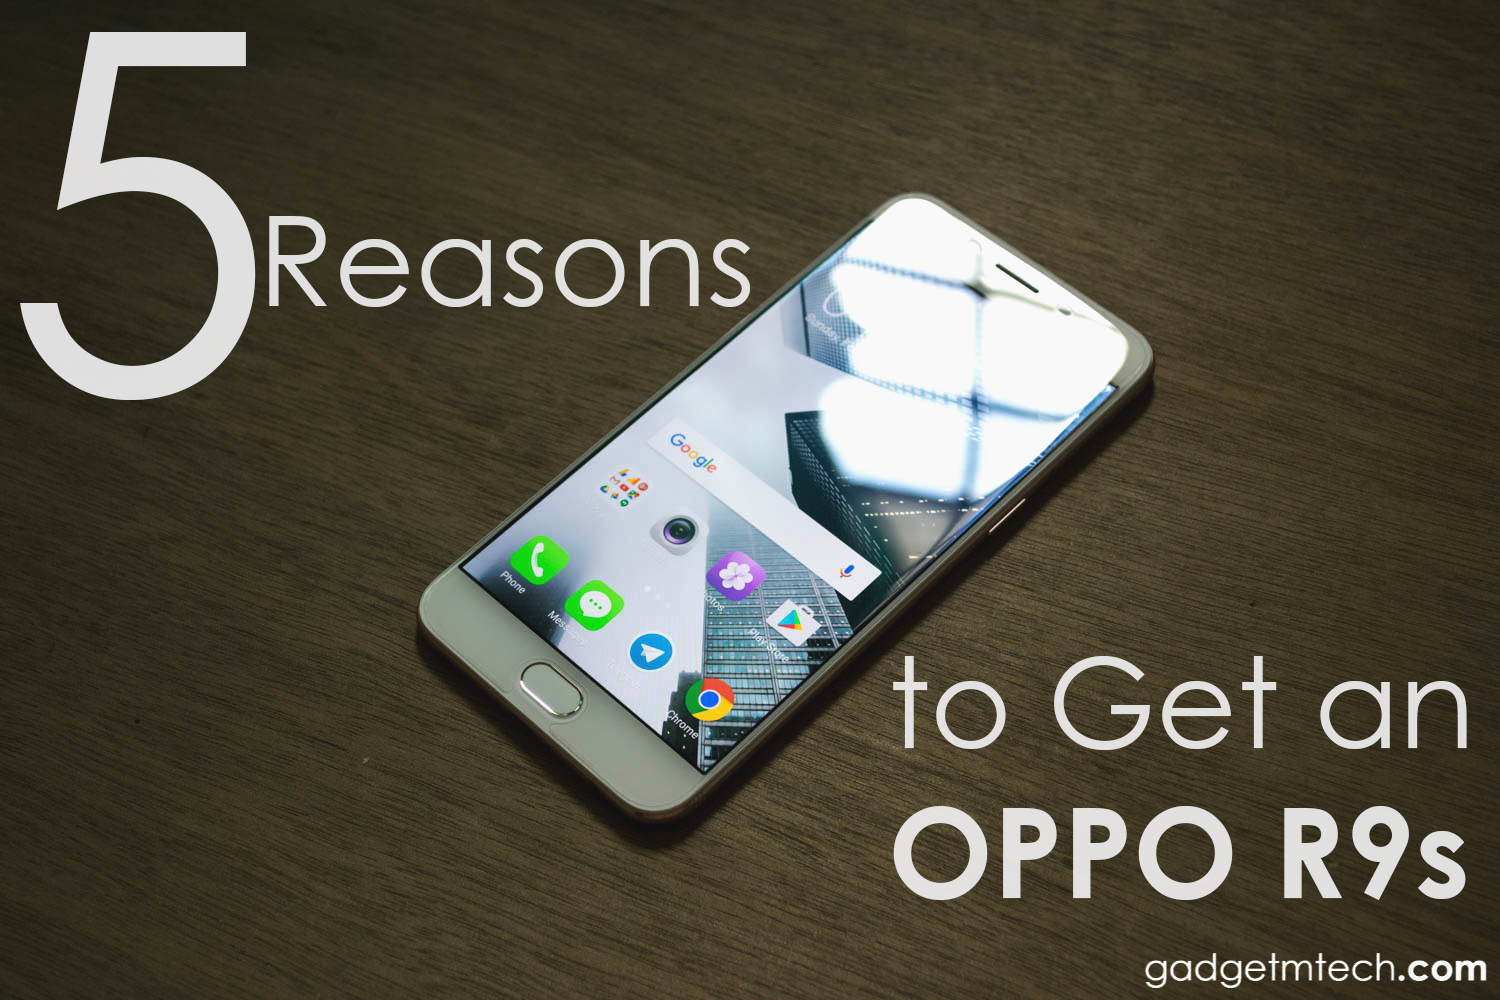 5 Reasons to Get an OPPO R9s